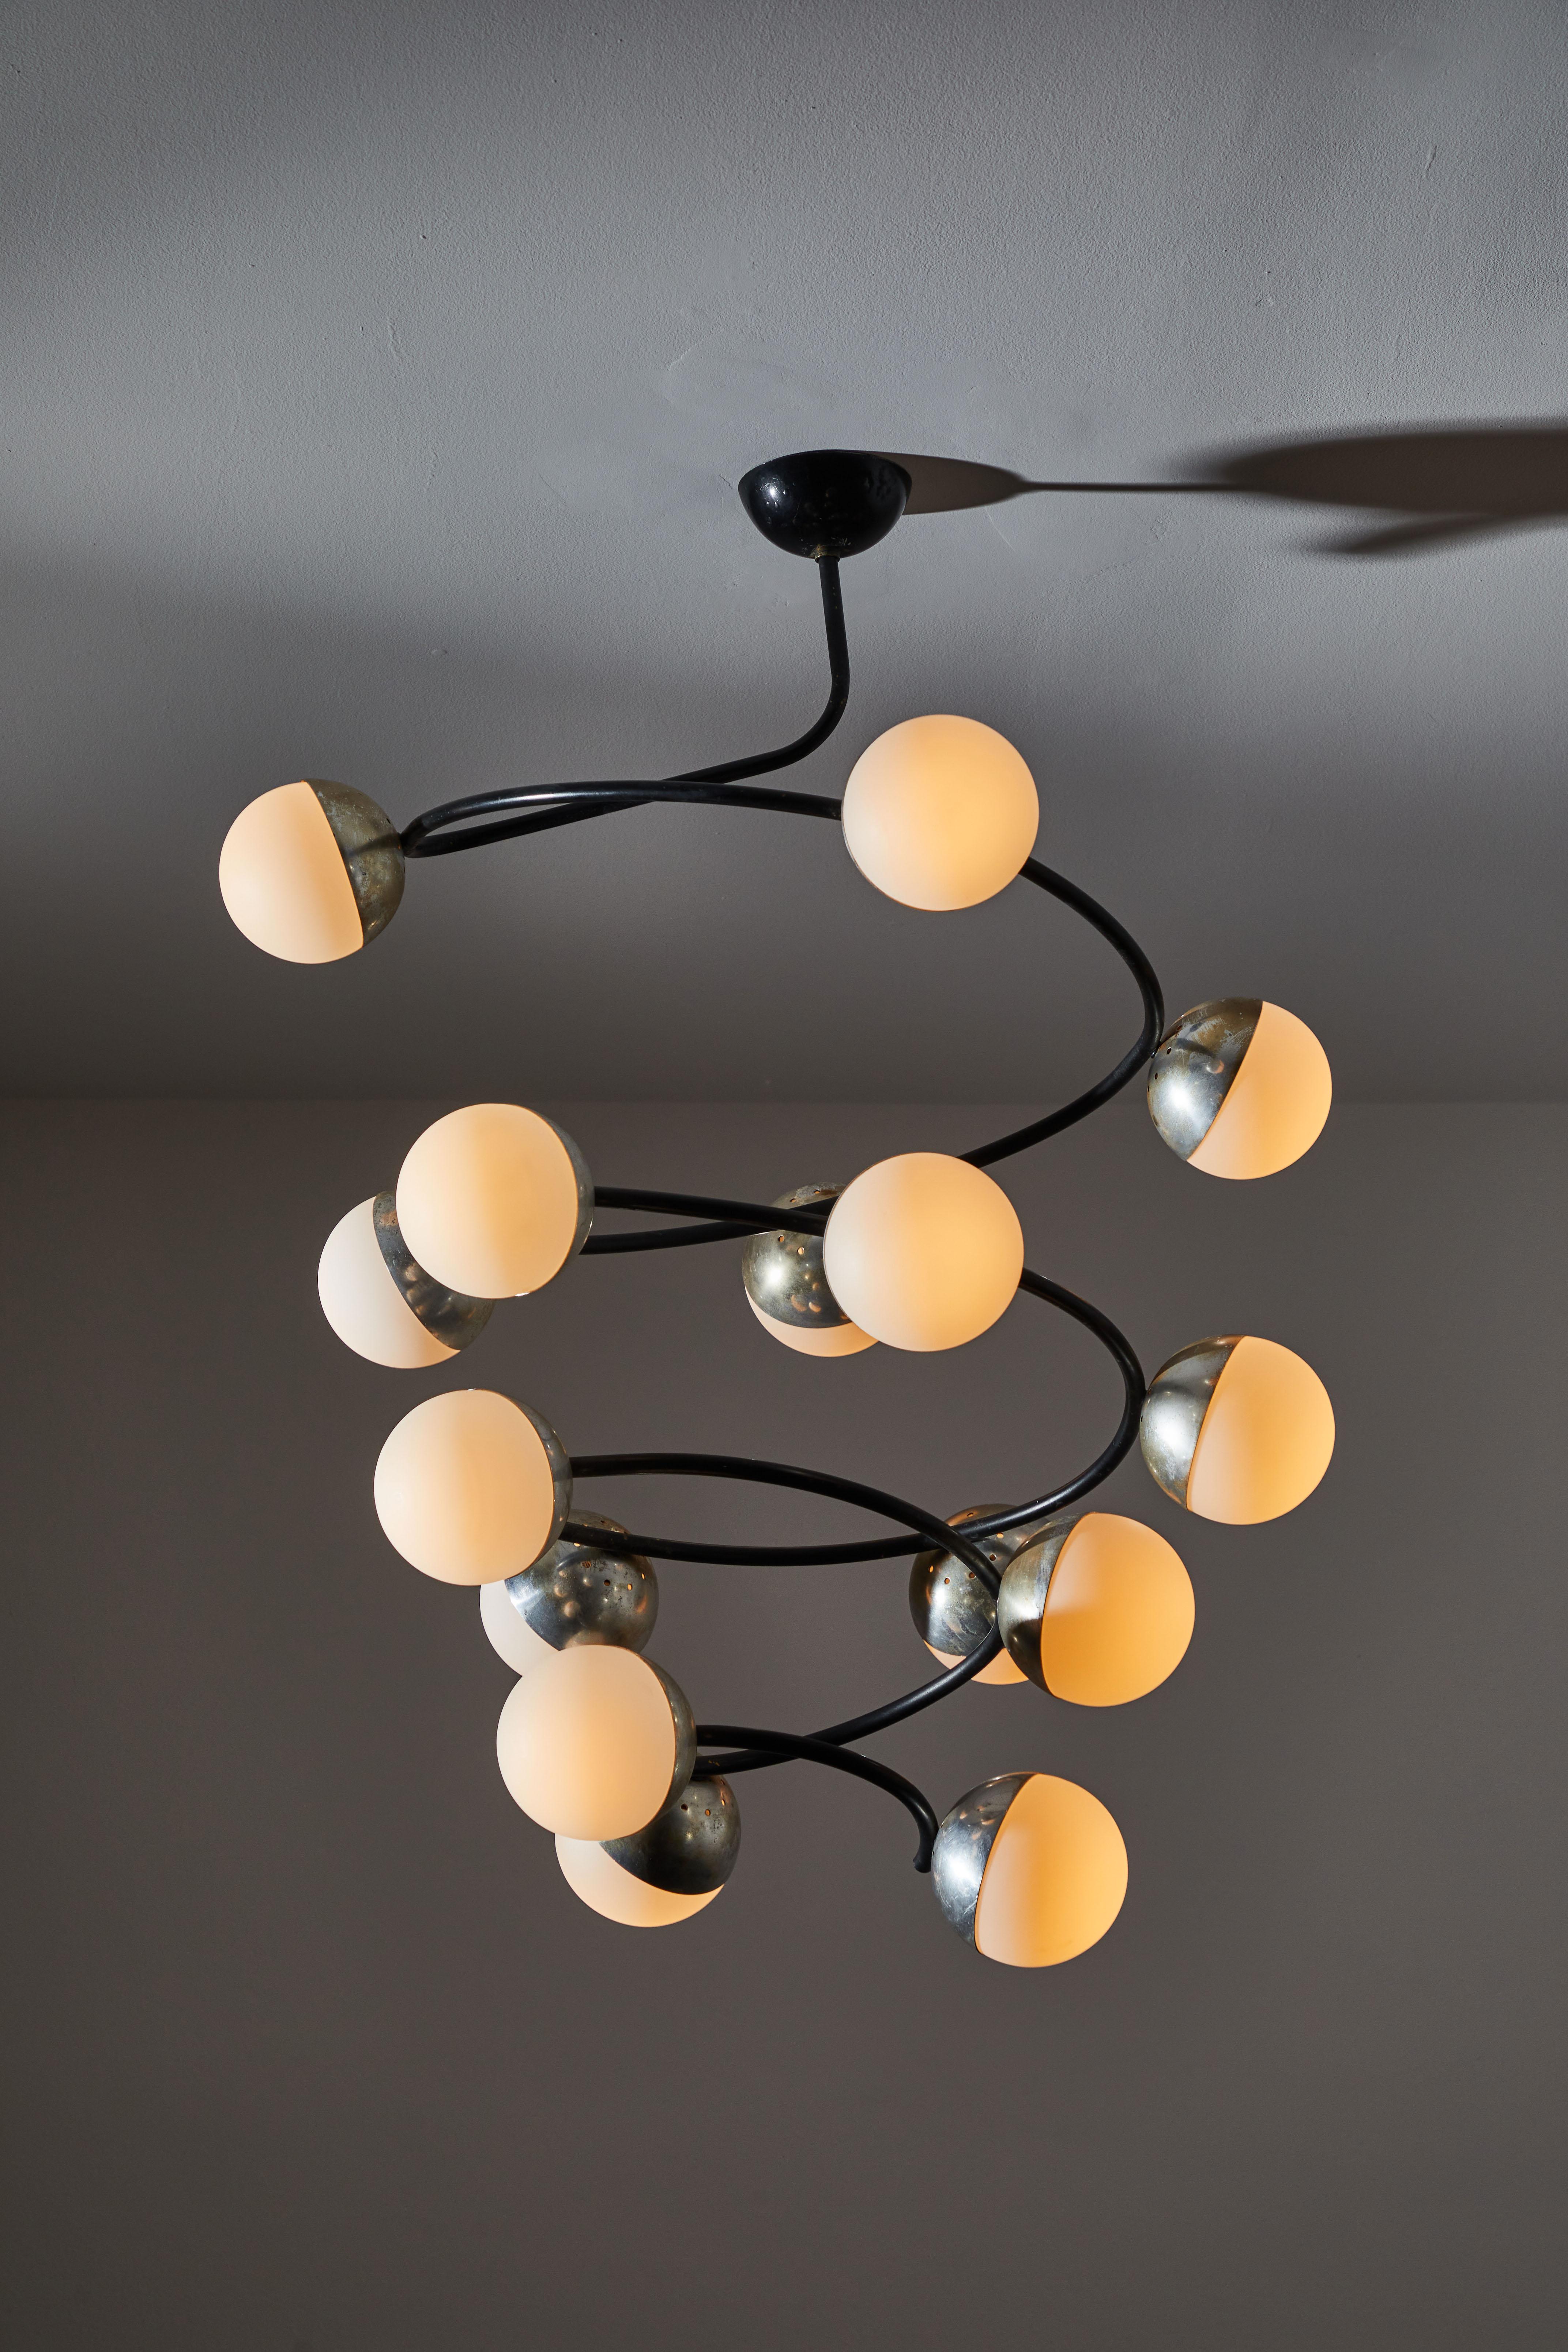 Rare Spiral chandelier by Stilnovo. Manufactured in Italy, circa 1950s. Aluminum with brushed satin glass diffusers. Wired for U.S. standards. Original canopy. We recommend 15 E14 European candelabra 25w maximum bulbs. Bulbs provided as a one time